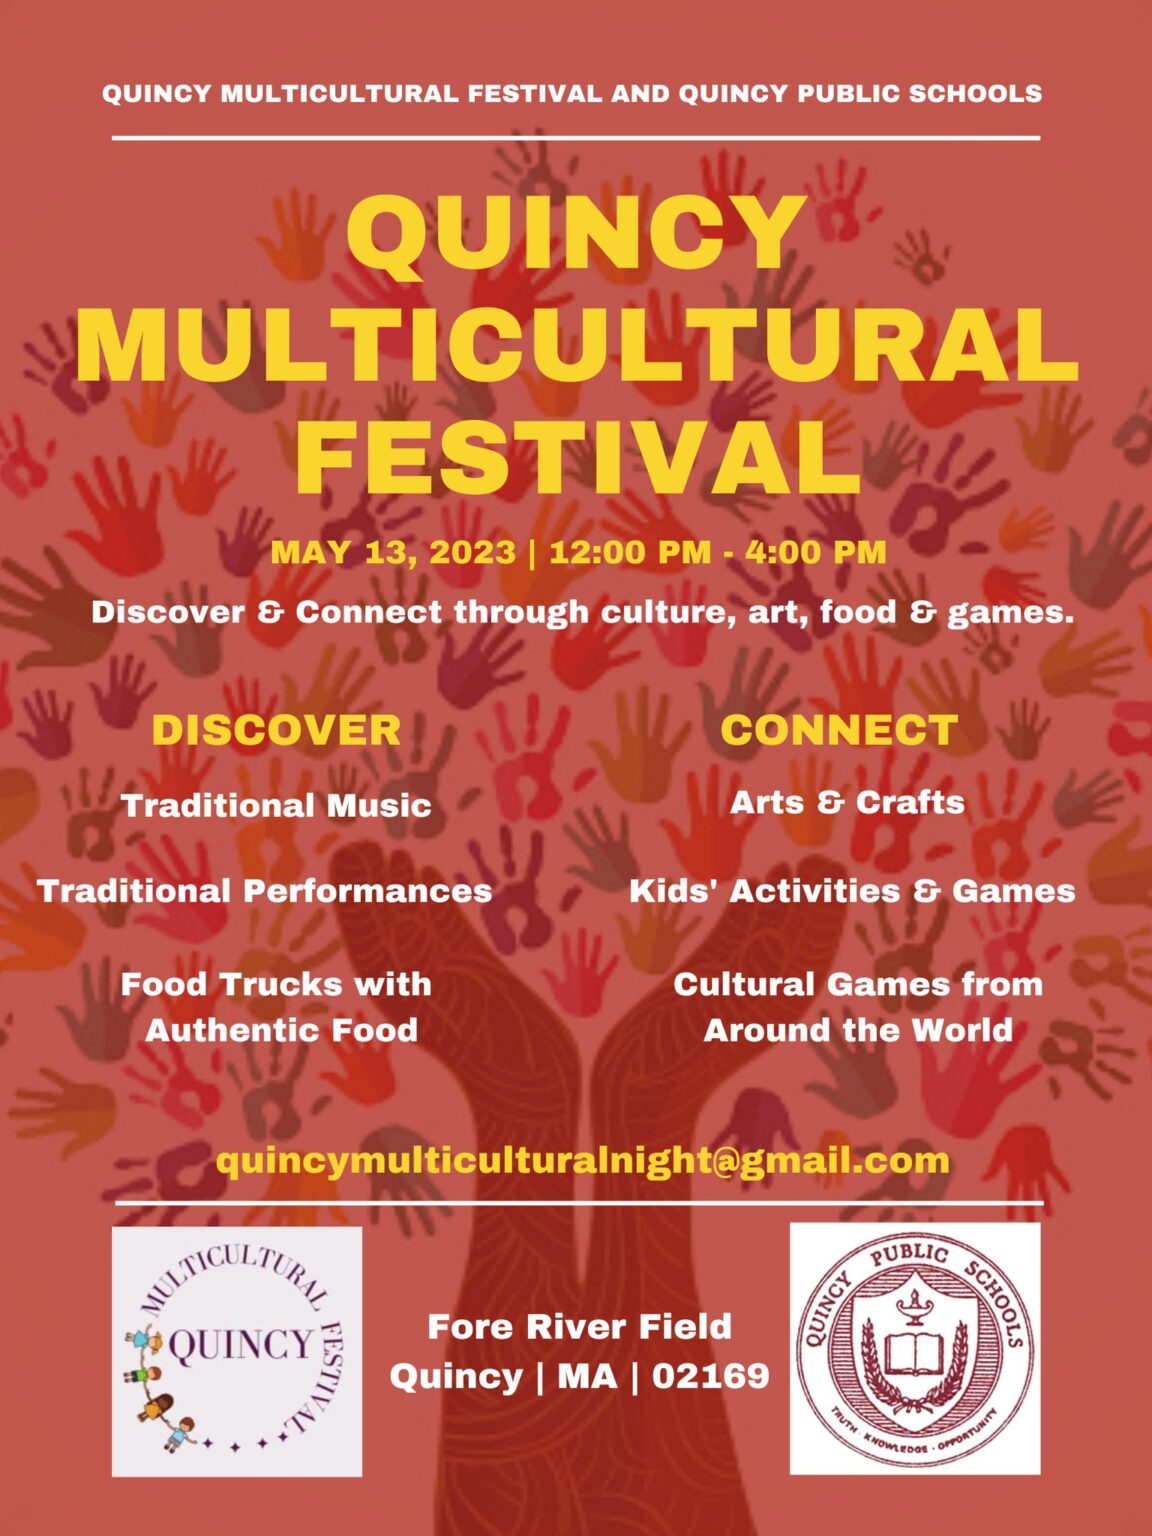 Quincy’s Multicultural Festival 2023 365 things to do in South Shore MA